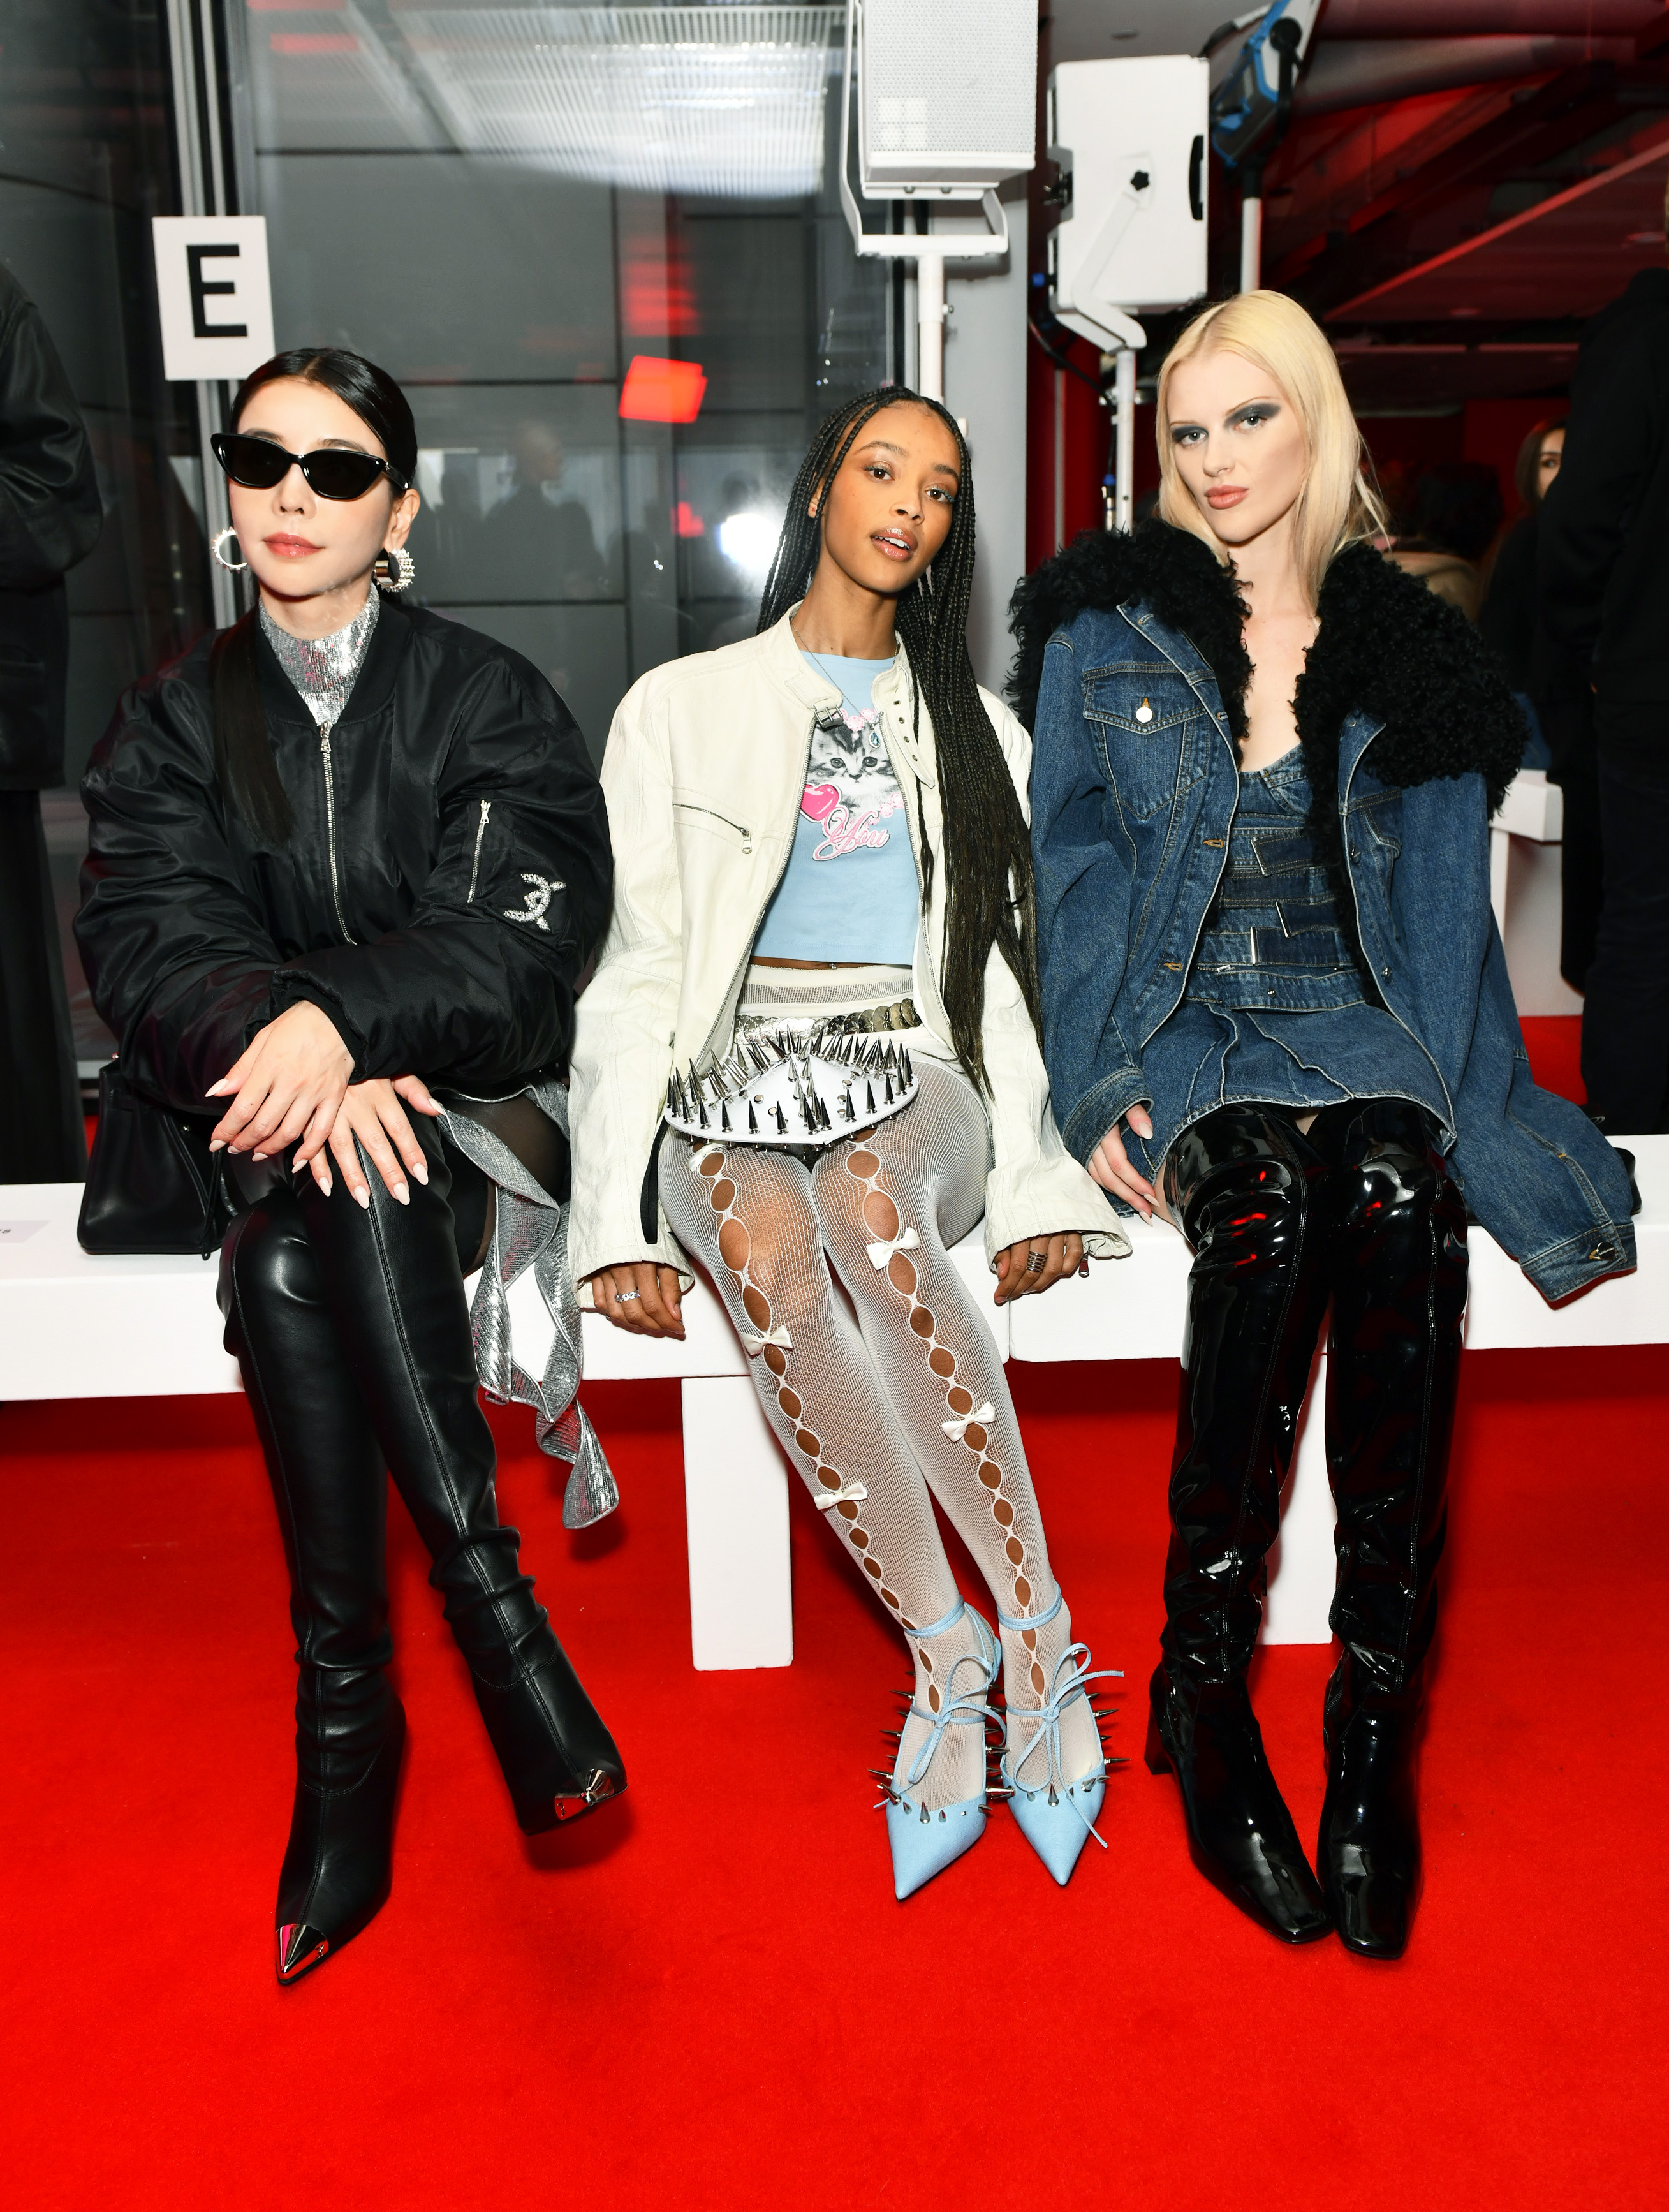 Tia Lee at the FROW of David Koma’s FW23 runway show L to R: Tia Lee, Tade, Elodie Russell